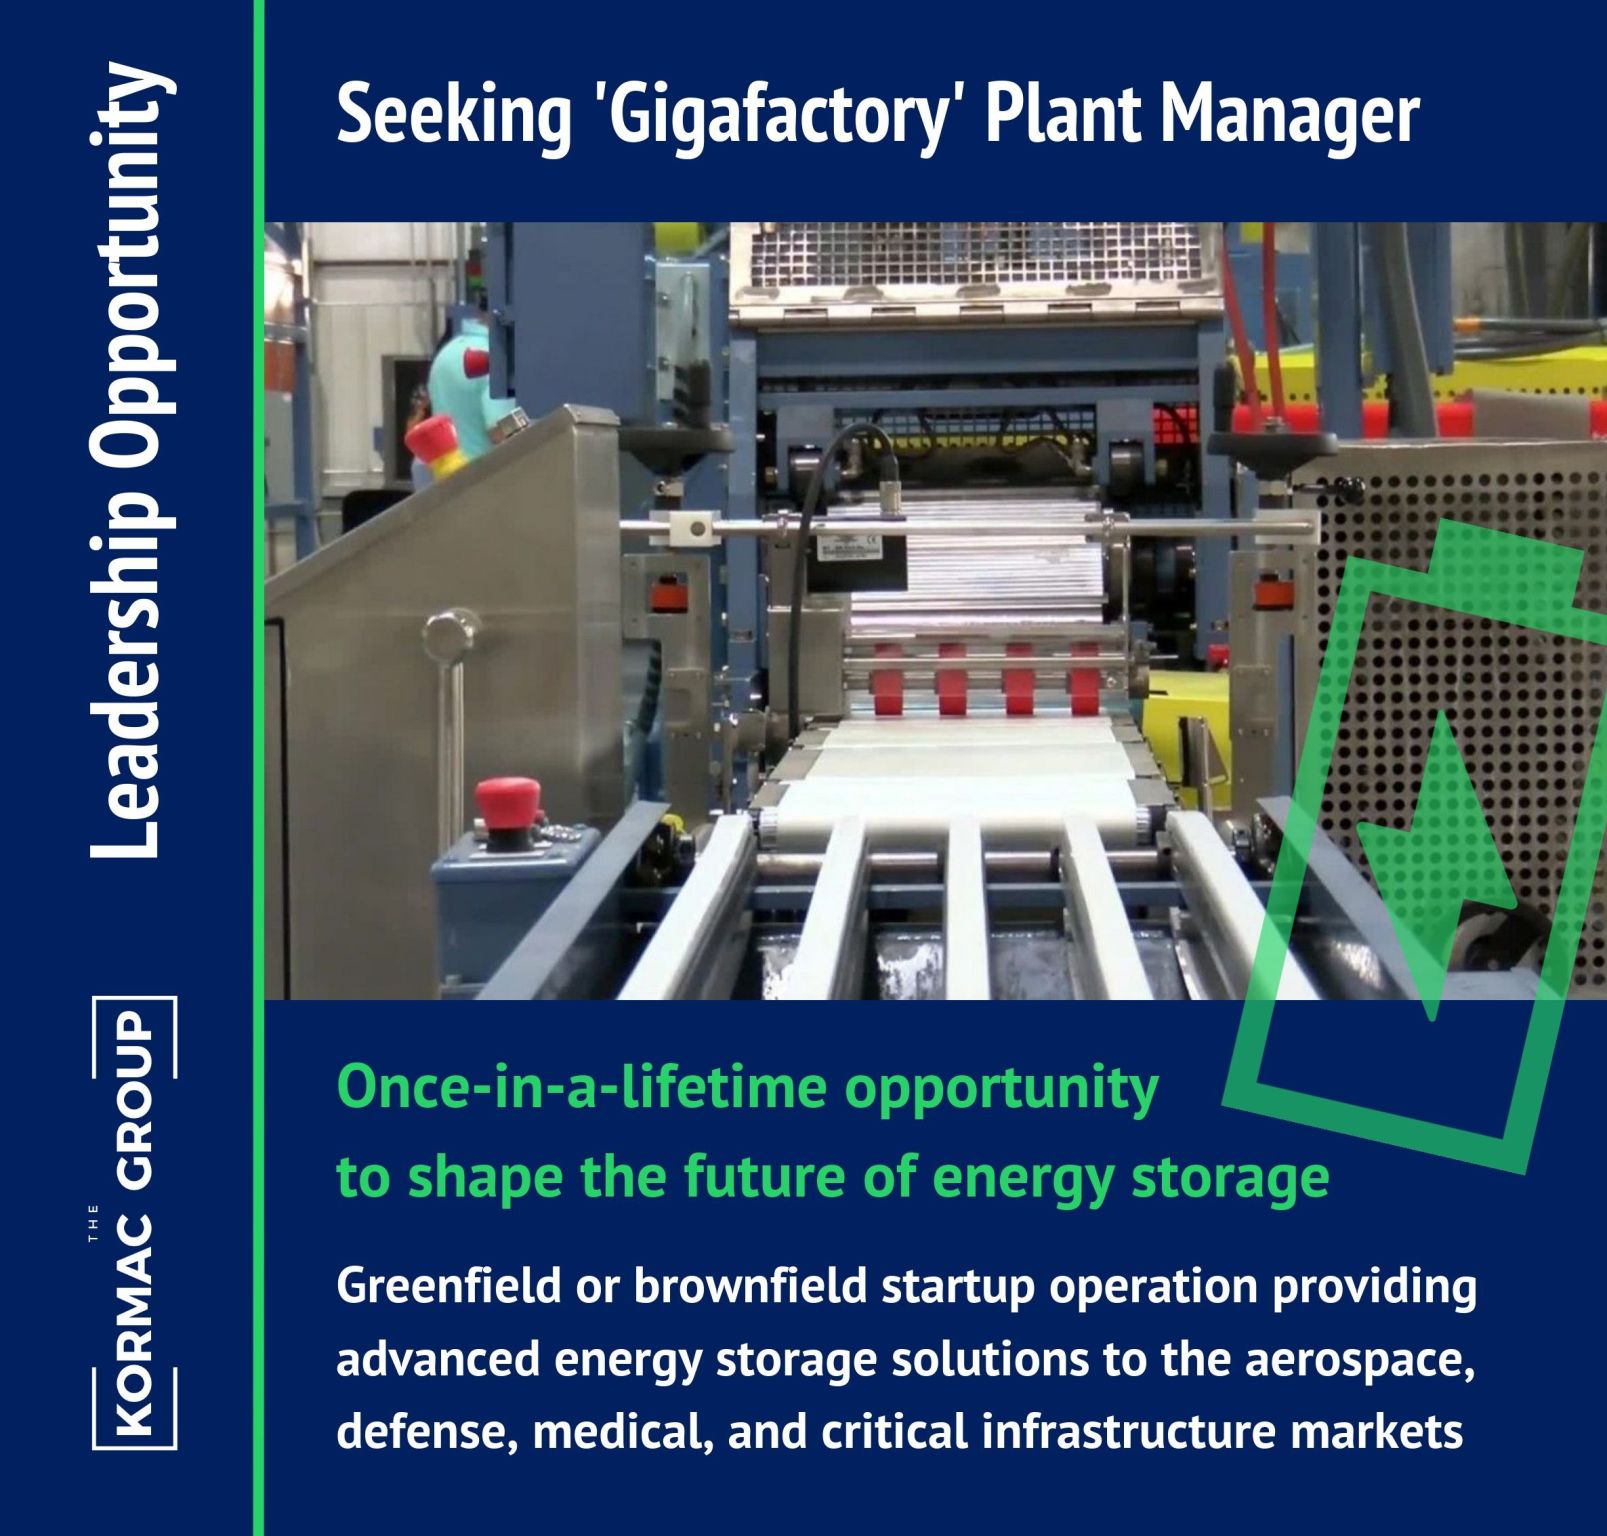 Leadership Opportunity Seeking 'Gigafactory' Plant Manager Once-in-a-lifetime opportunity to shape the future of energy storage Greenfield or brownfield startup operation providing advanced energy storage solutions to the aerospace, defense, medical, and critical infrastructure markets